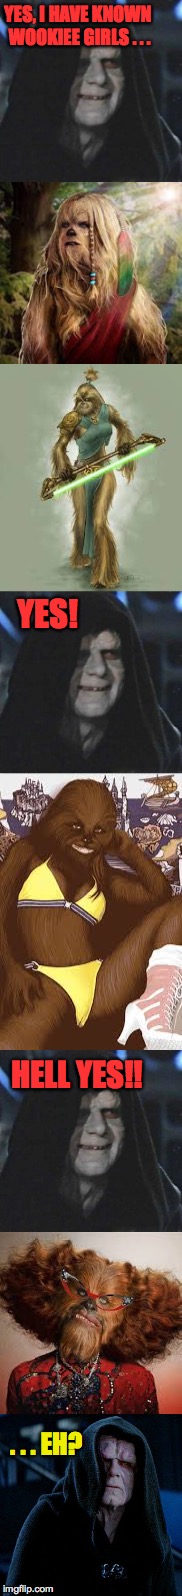 It's more than green Orion girls out there, y'know... | YES, I HAVE KNOWN WOOKIEE GIRLS . . . YES! HELL YES!! . . . EH? | image tagged in memes,star wars,star wars hell no,sith lord,wookiee,funny | made w/ Imgflip meme maker